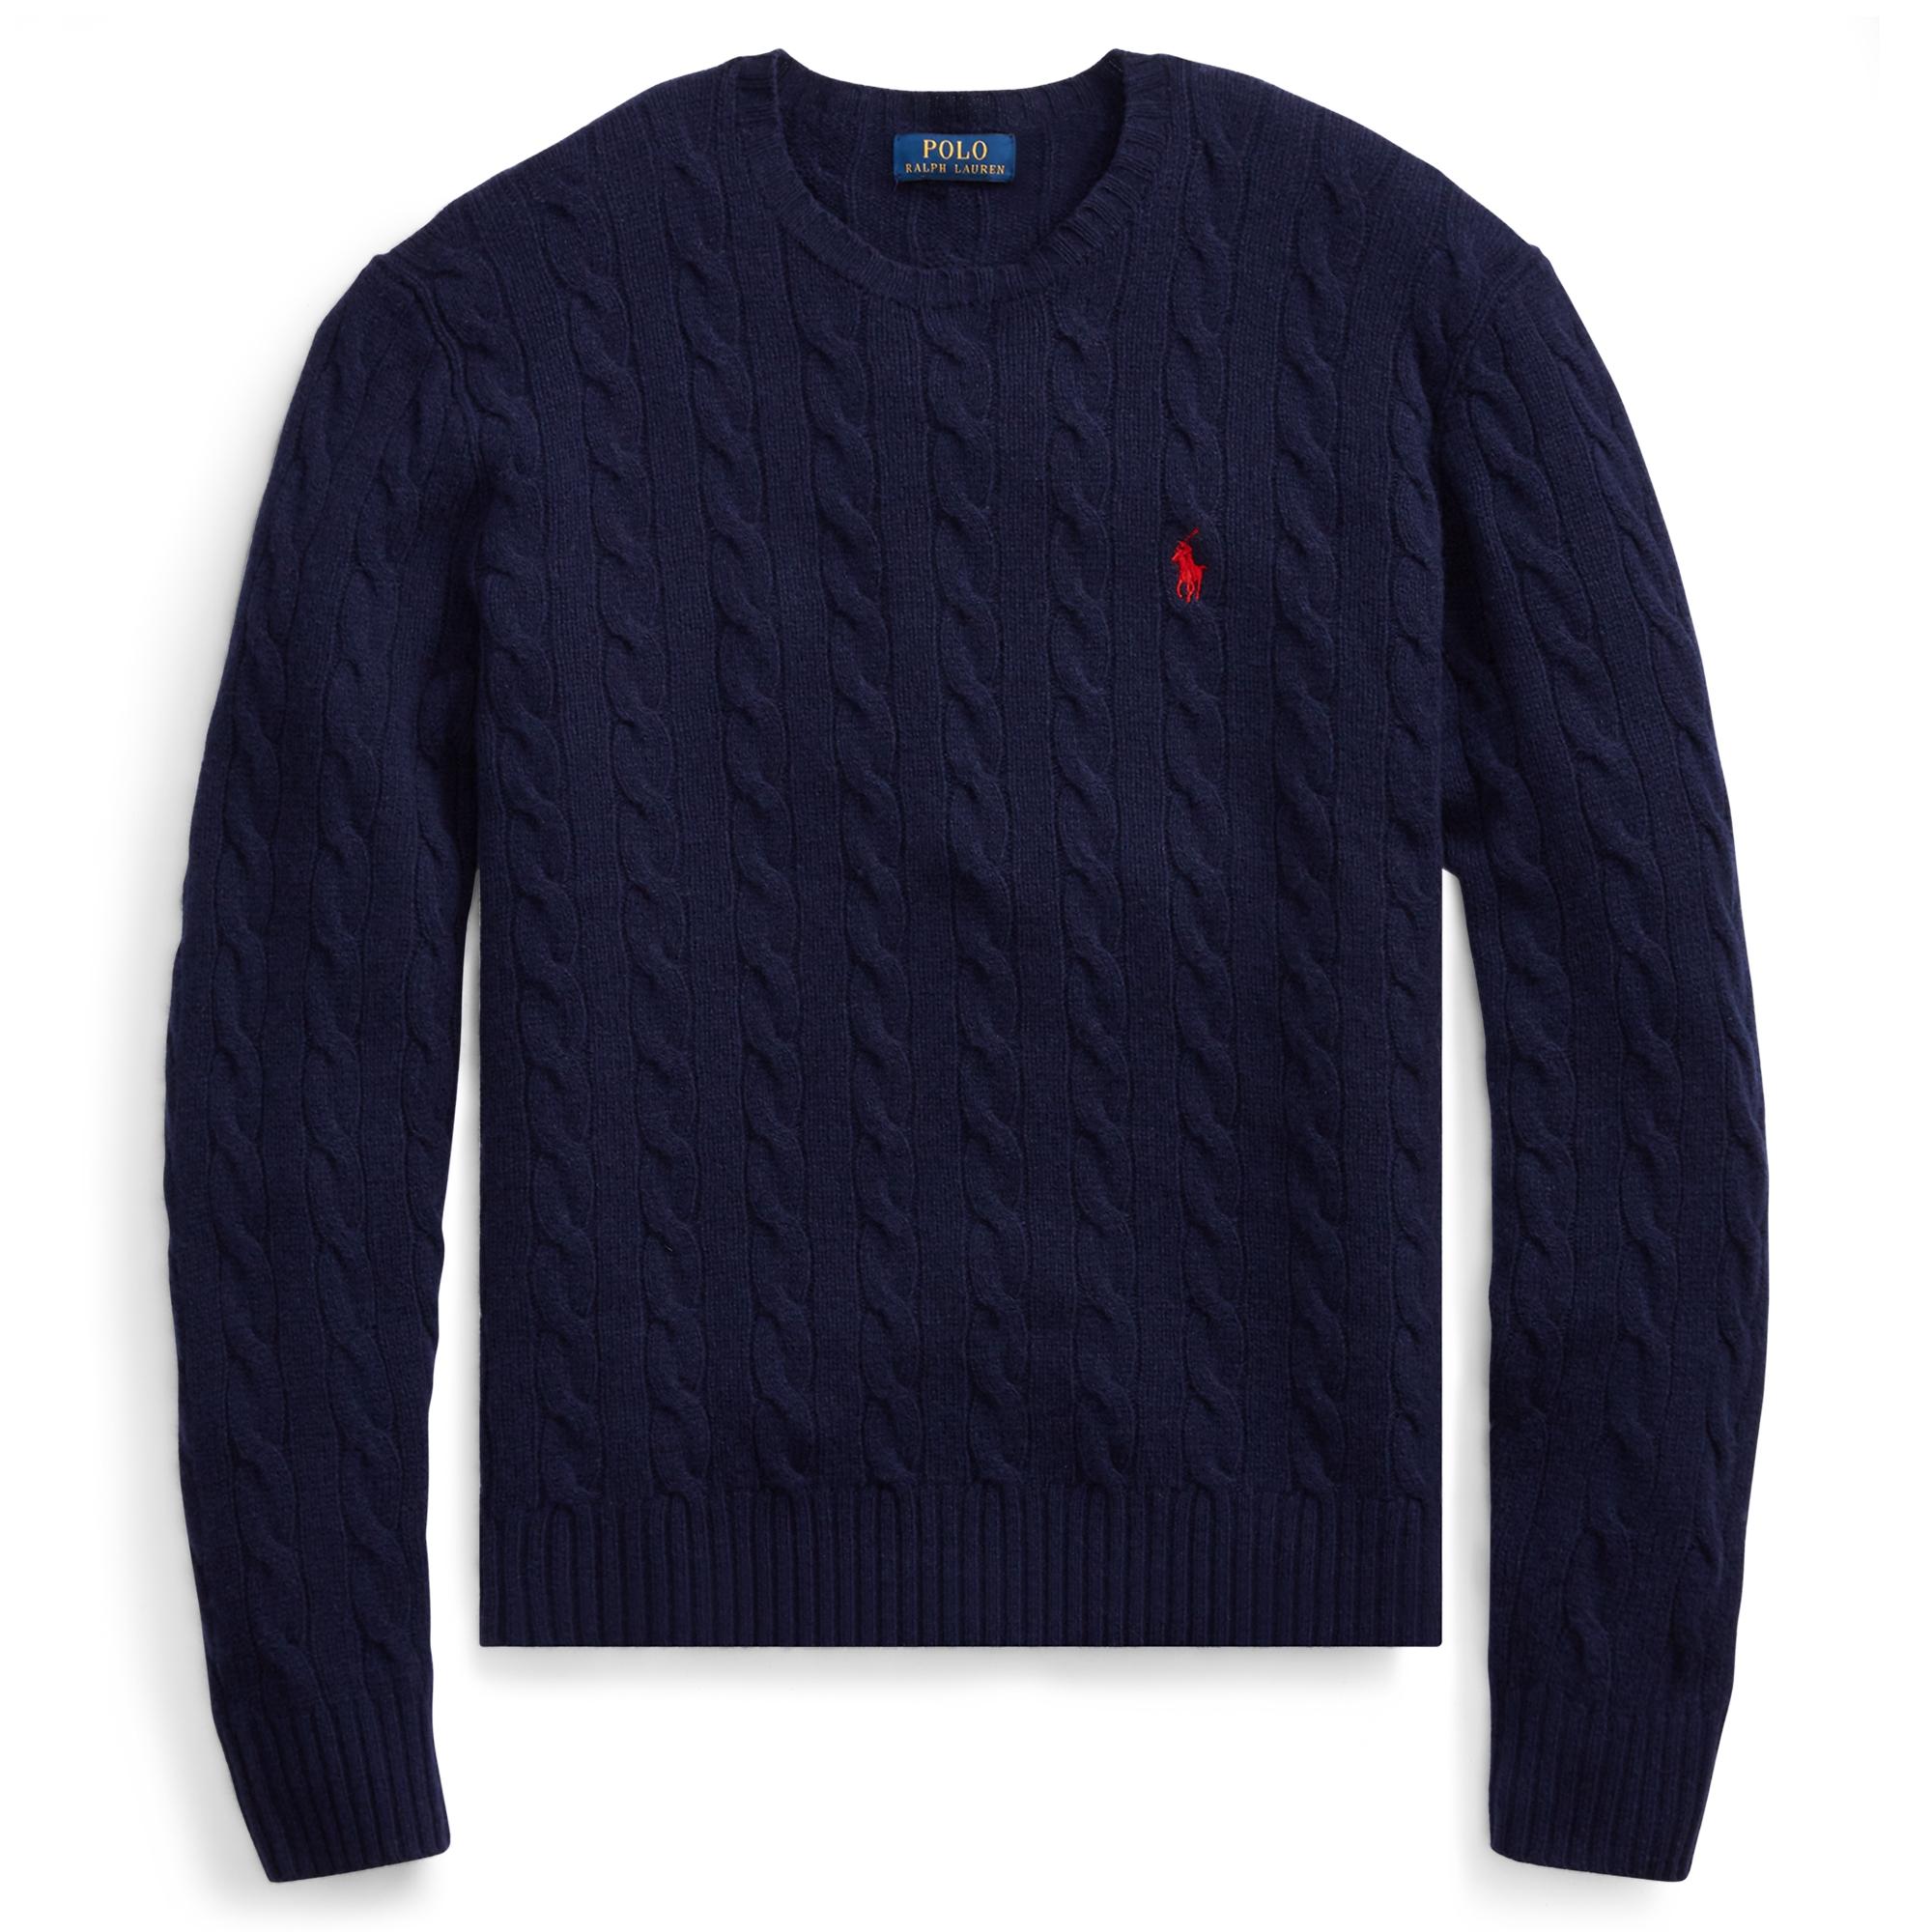 Polo Ralph Lauren Cable Wool-cashmere Jumper in Blue for Men - Lyst